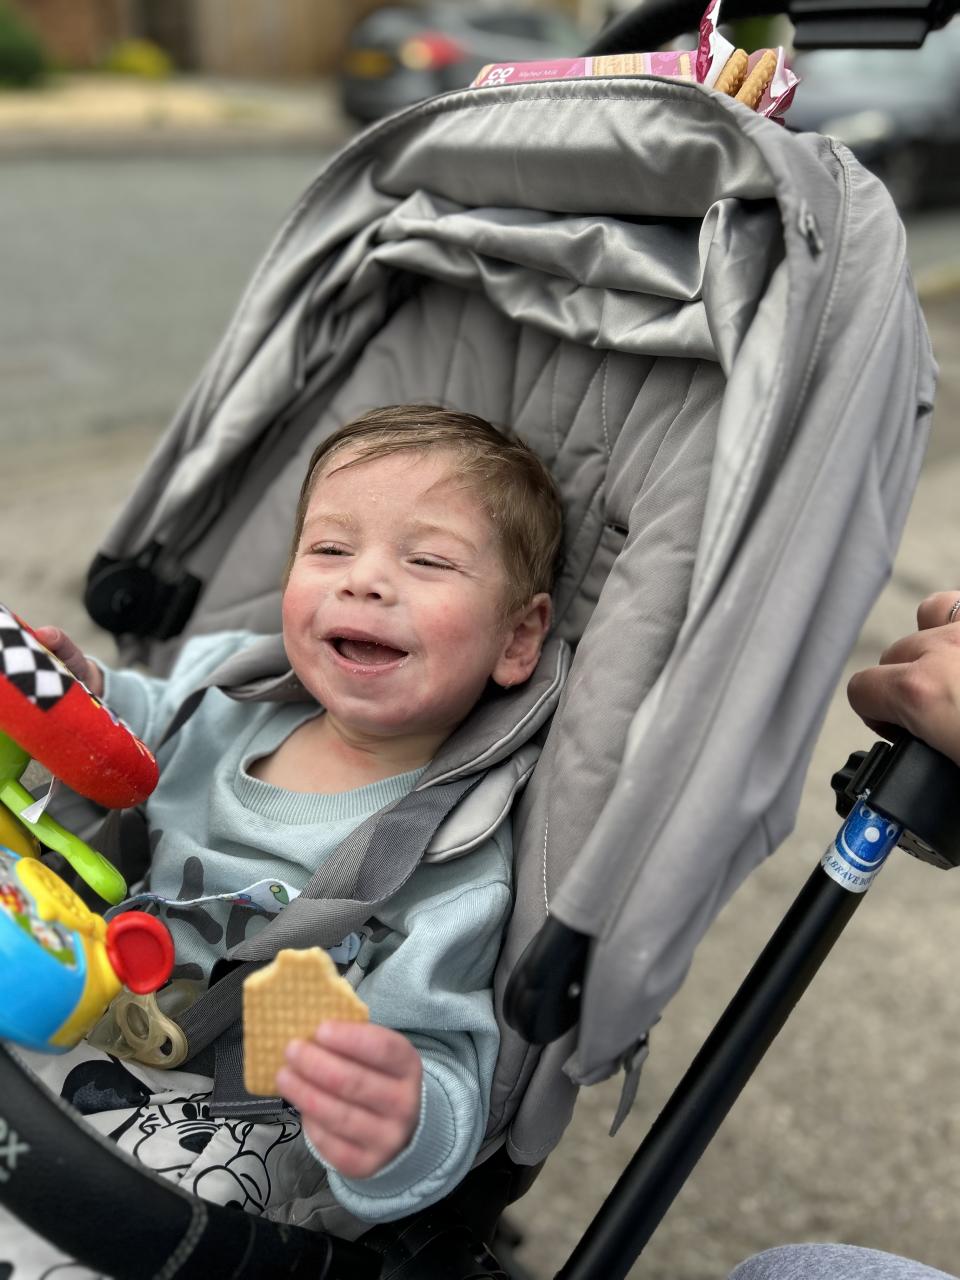 Tommy was diagnosed with neonatal hemochromatosis shortly after birth and doctors said he may not survive without a transplant. (Lauren Beckett/SWNS)